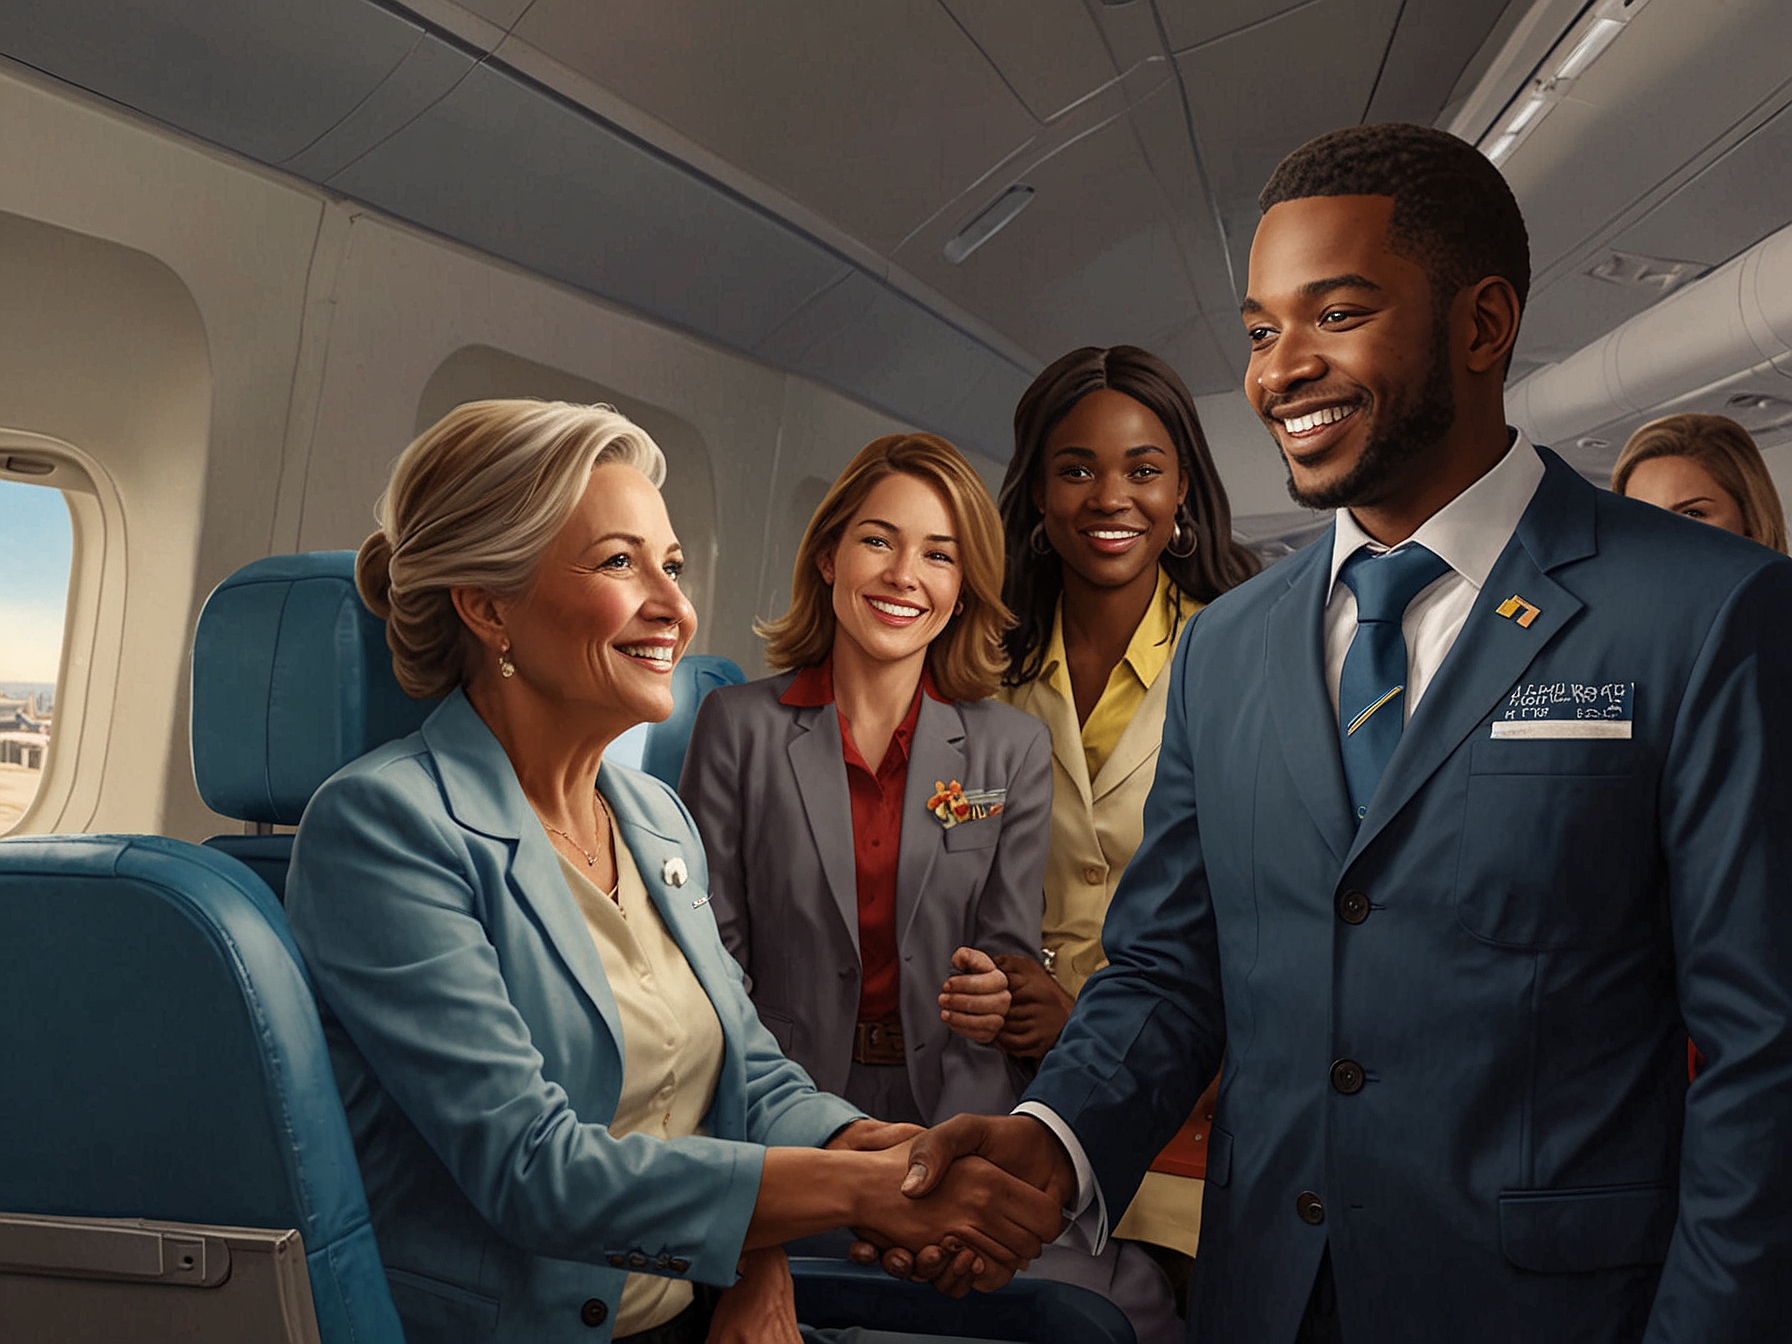 The grateful passenger and his wife reunite with the life-saving flight attendants in Cape Town, celebrating their remarkable journey from a life-threatening incident to lasting friendships.